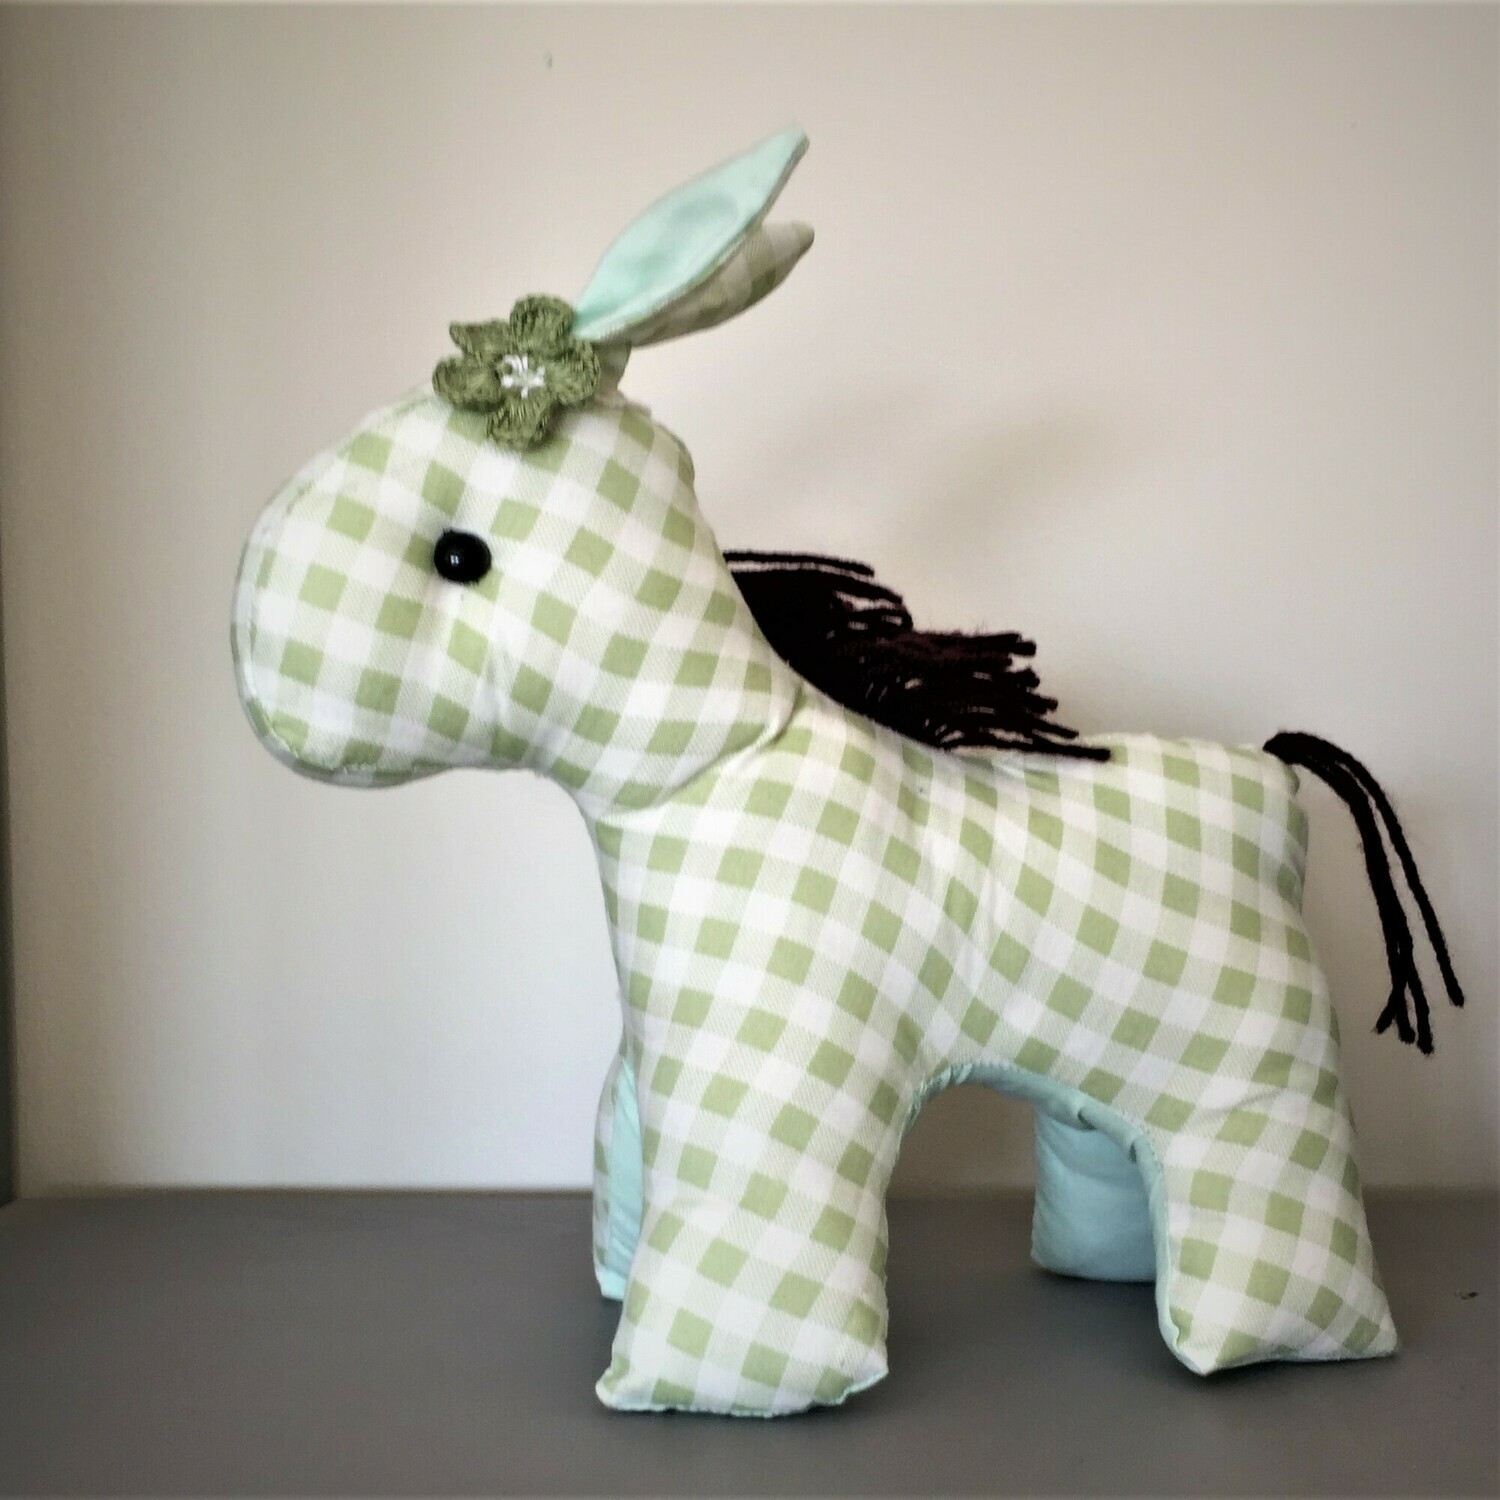 Donkey Doo in green and white